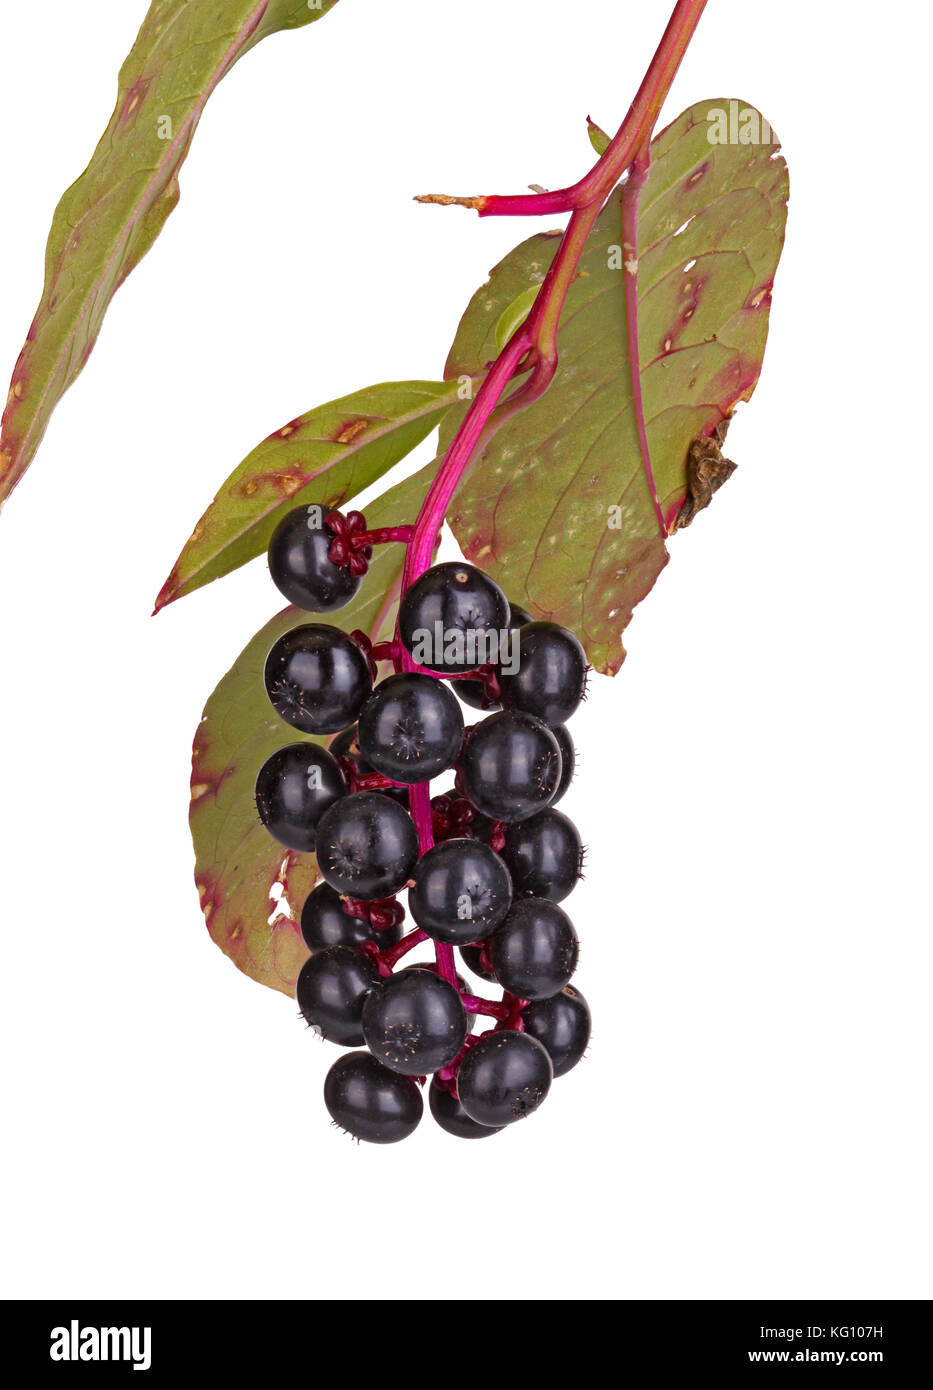 Branch with leaves showing infection with Cercospora and ripe, purple fruit cluster of pokeweed (Phytolacca americana) isolated against a white backgr Stock Photo